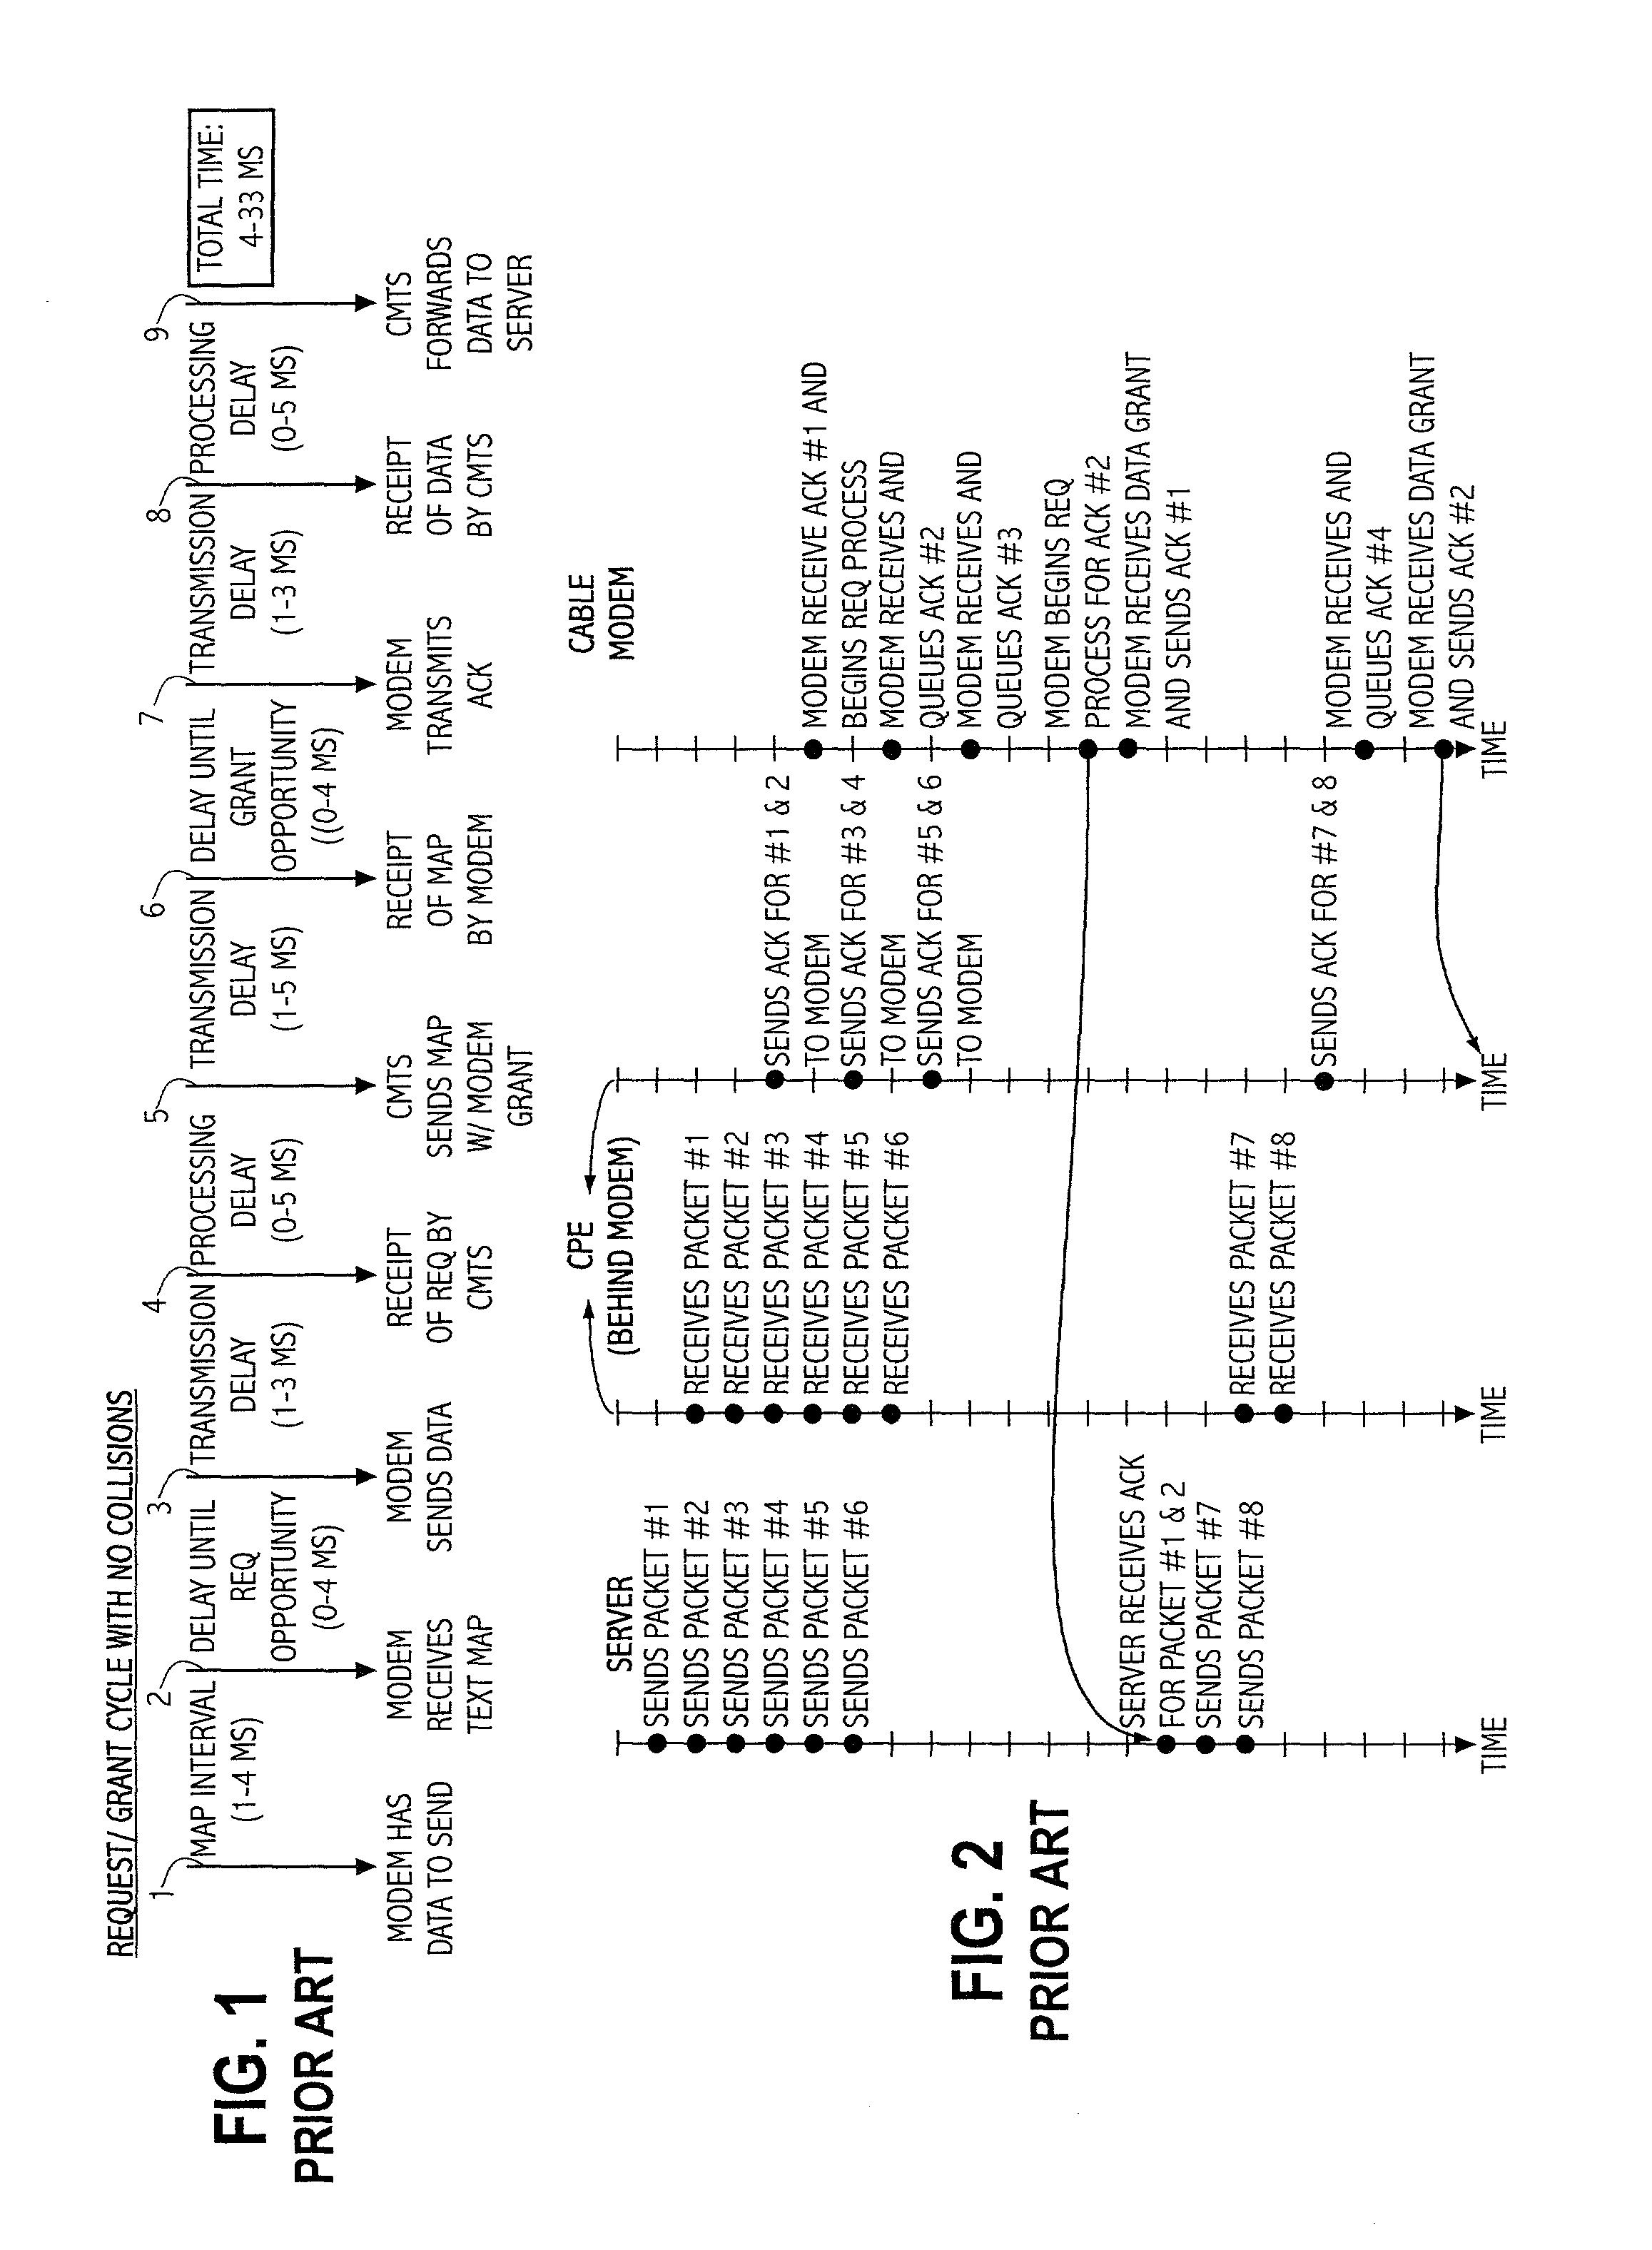 Communication of packet arrival times to cable modem termination system and uses thereof